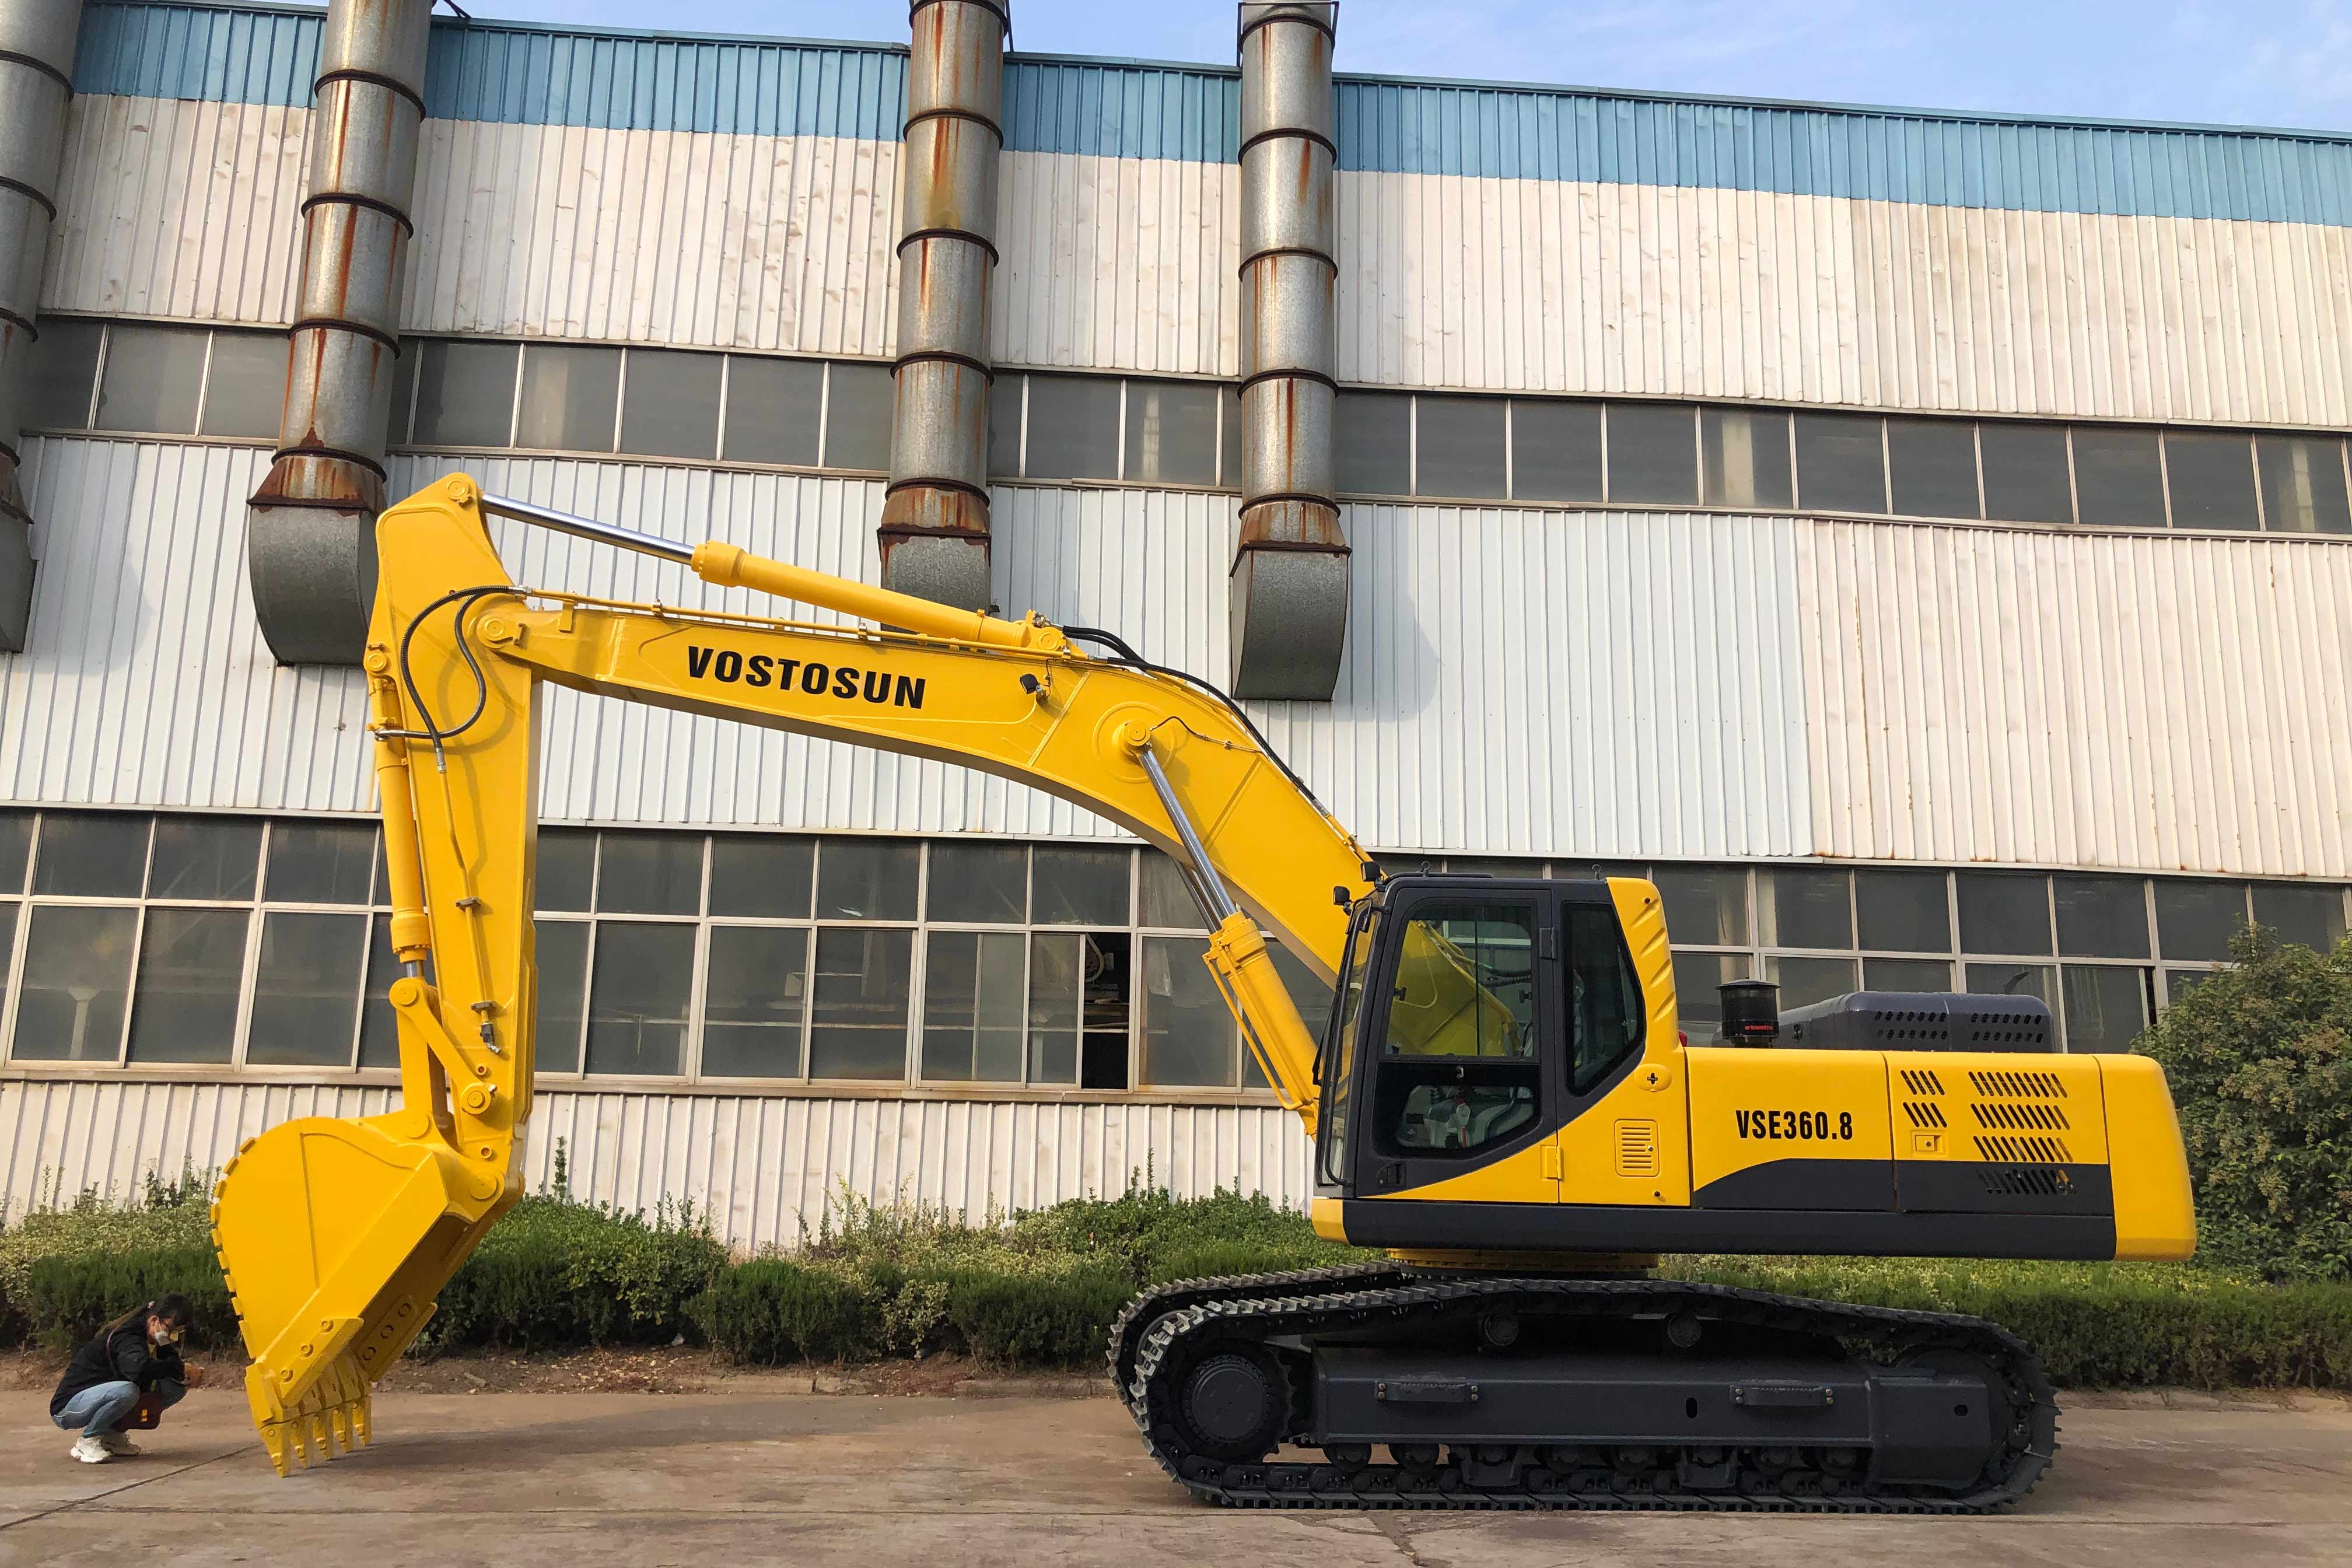 On October 13, 2020, the excavators purchased by a Nigerian customer began to be shipped.